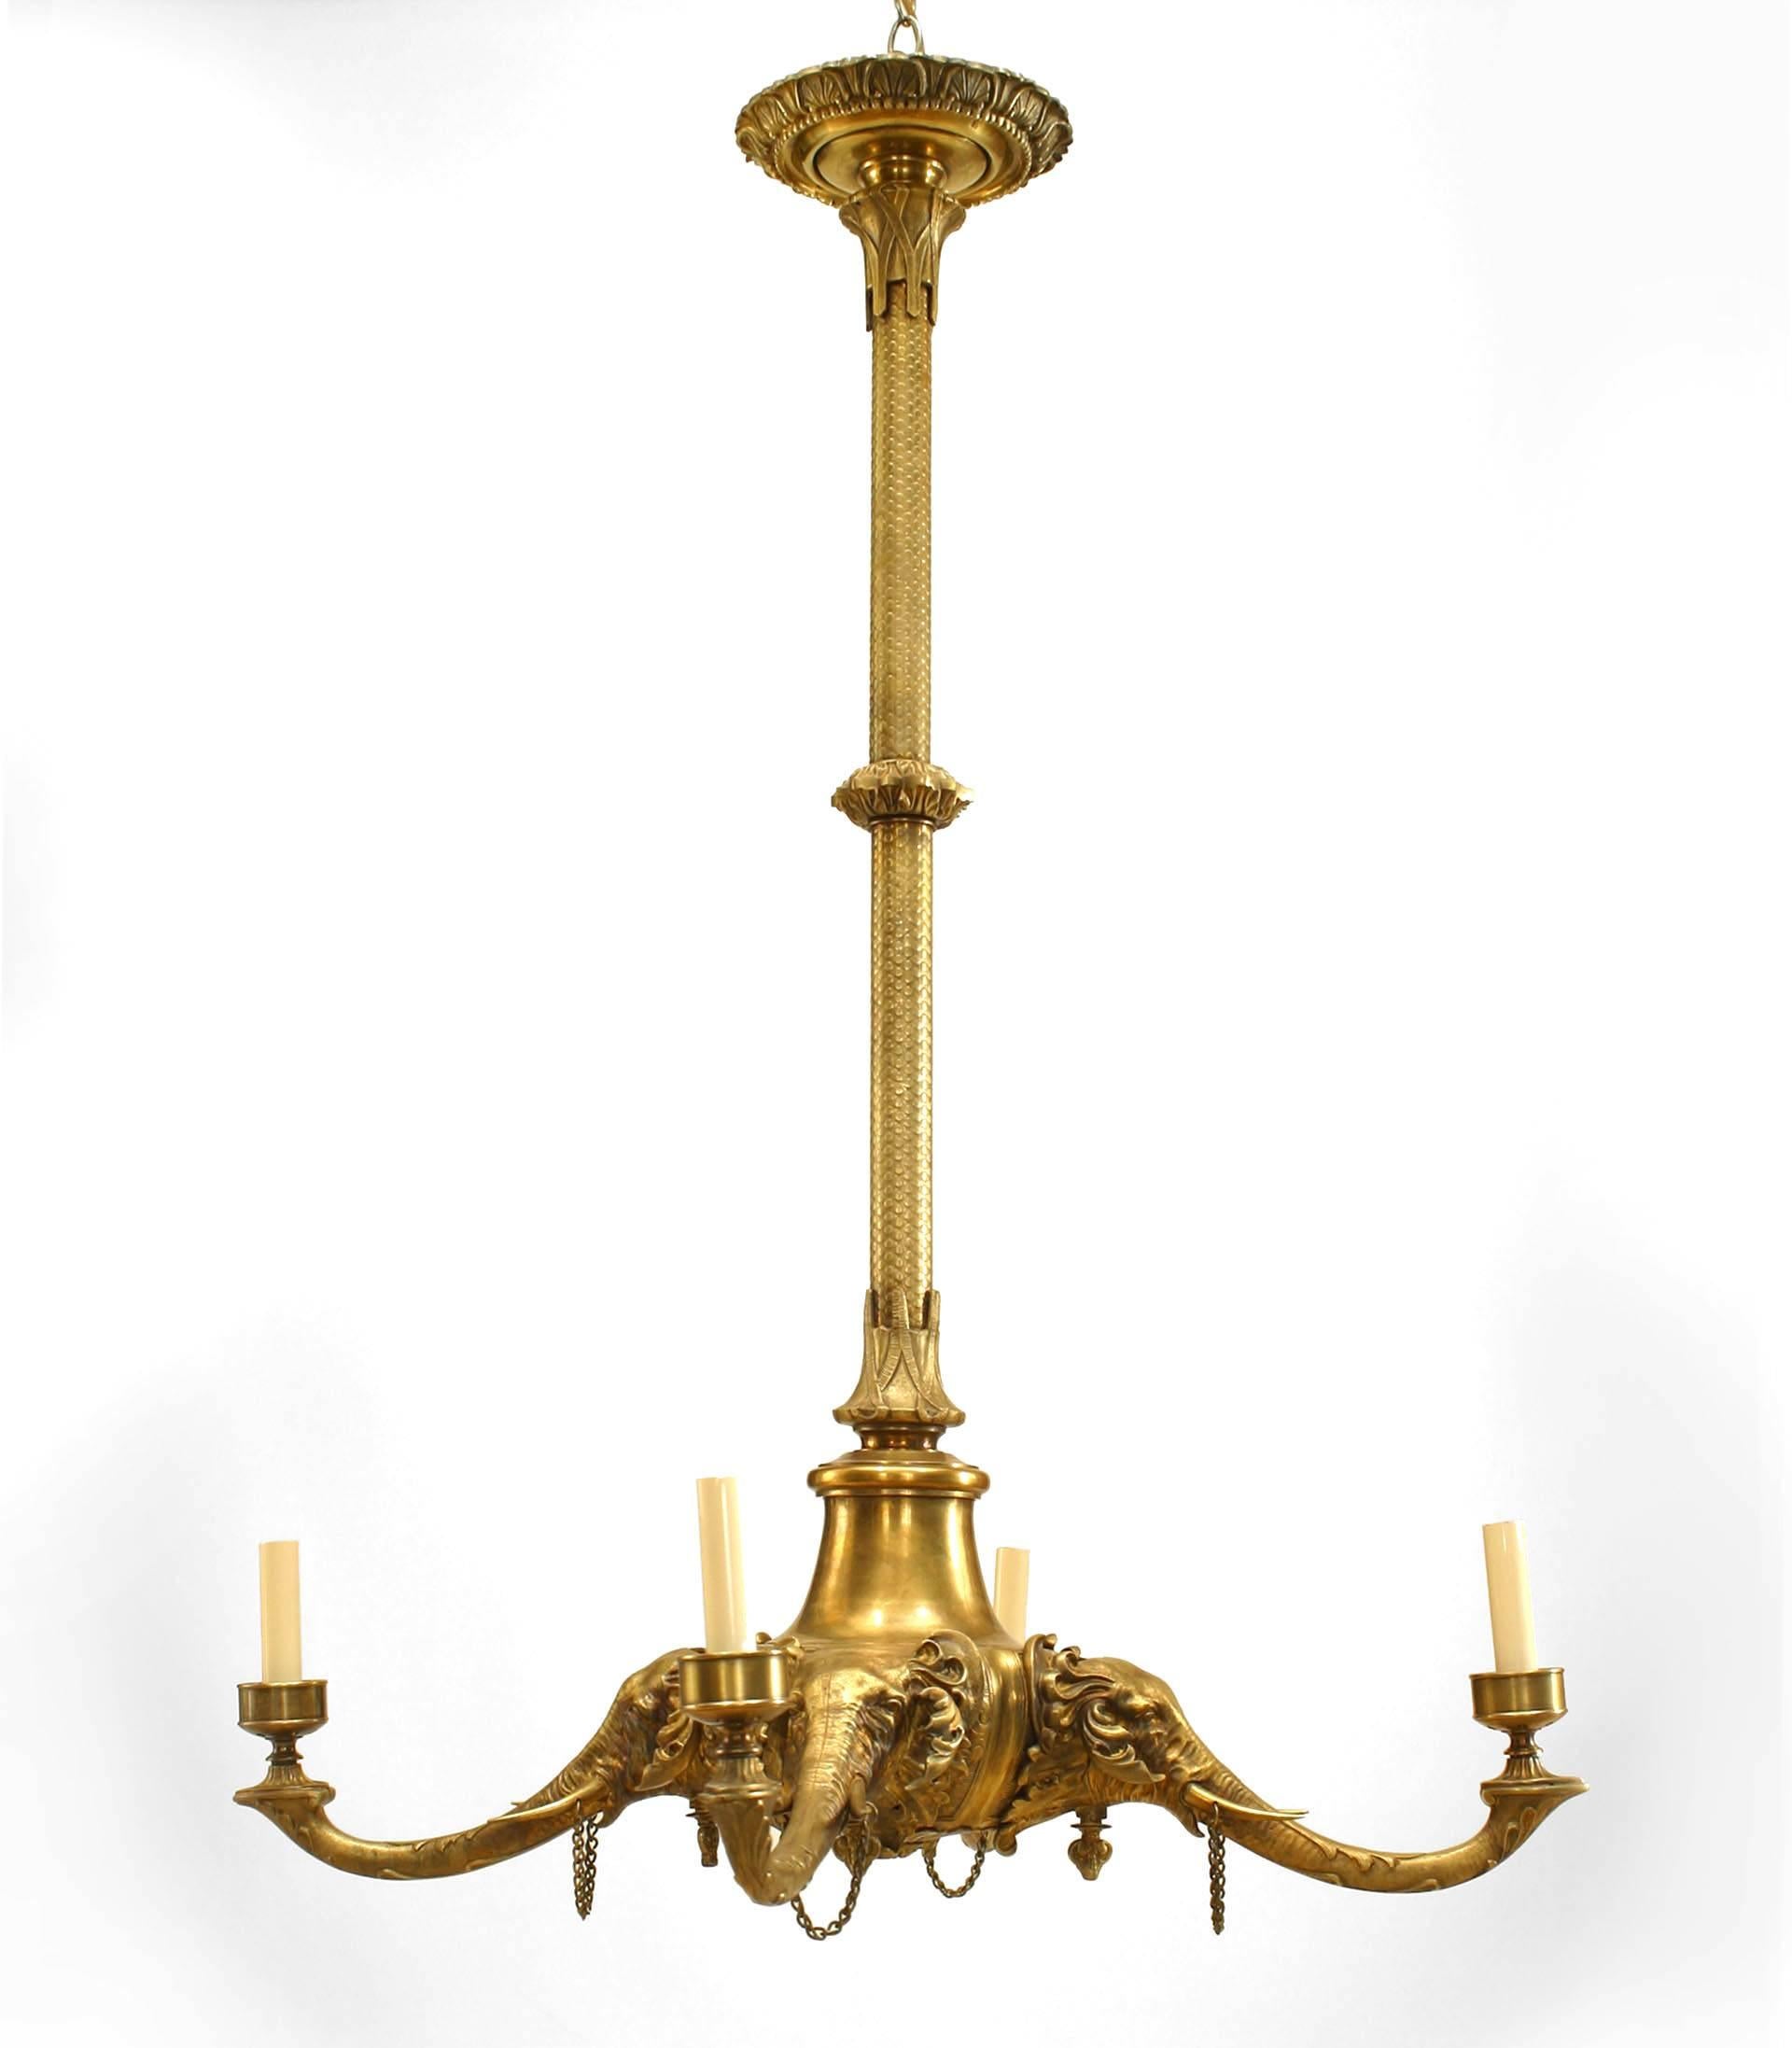 English Regency-Style (Circa 1840) bronze 4 arm chandelier with elephant heads (originally gas, now fitted for electricity)
